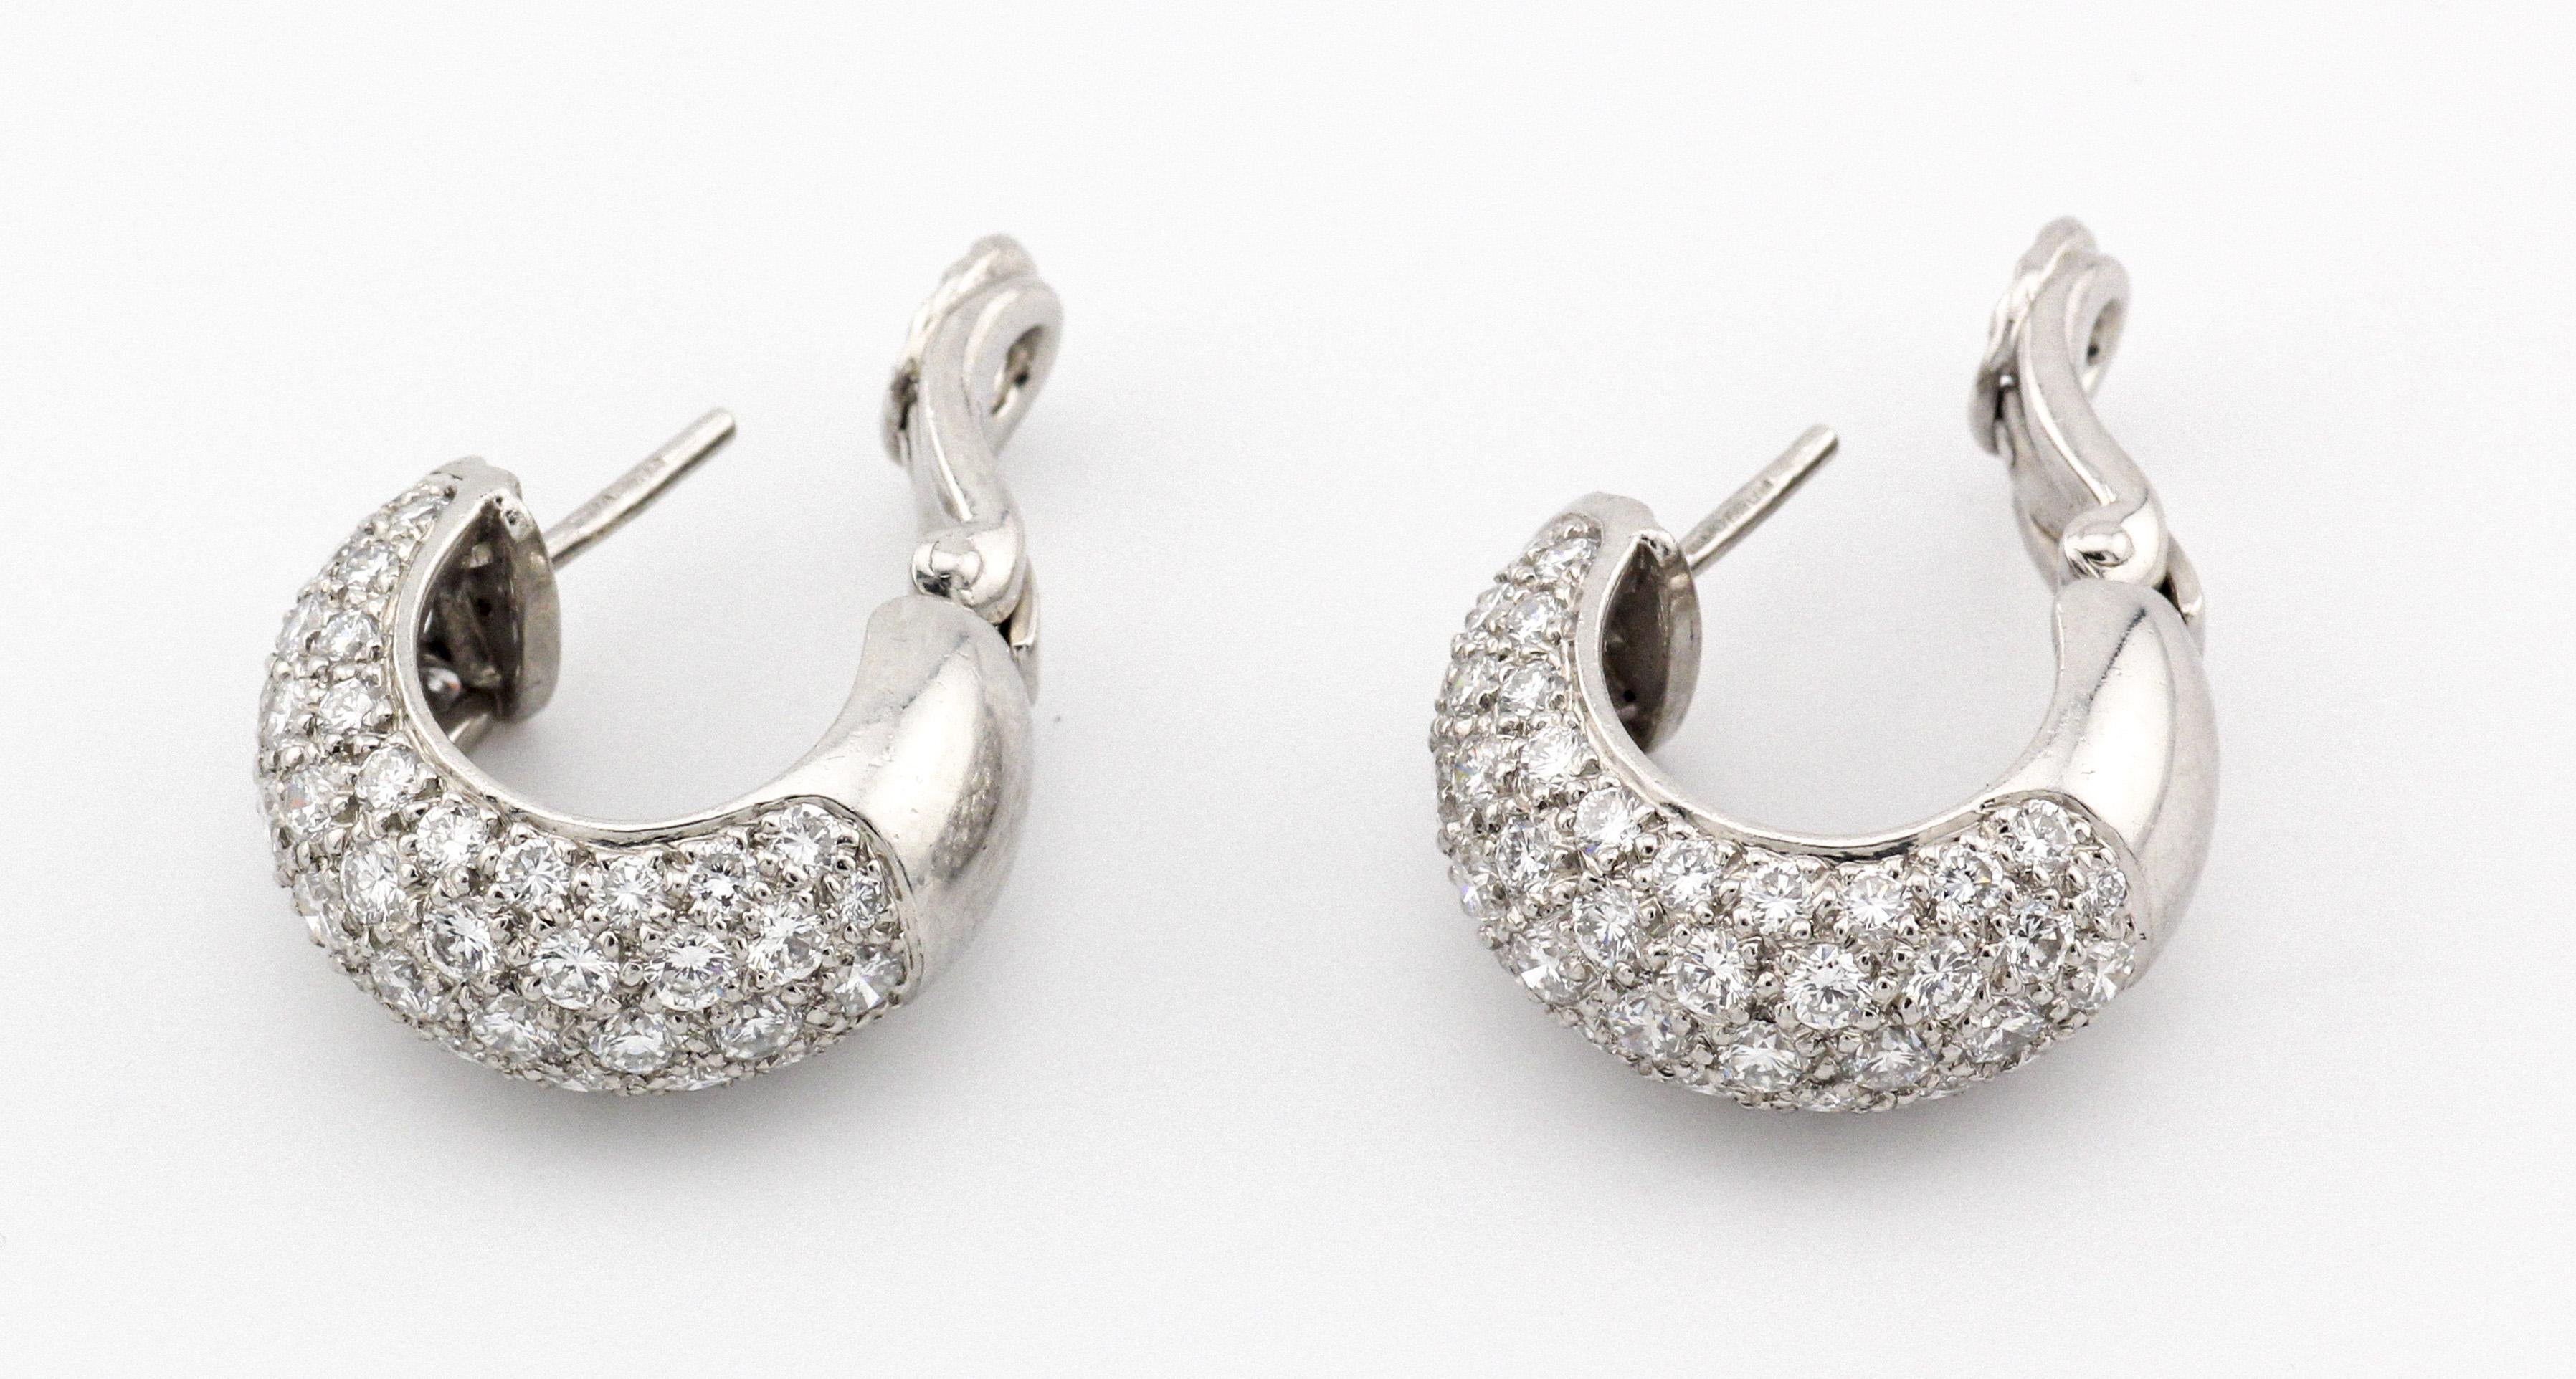 Tiffany & Co. Etoile 5-Row Diamond Platinum Hoop Earrings In Good Condition For Sale In Bellmore, NY